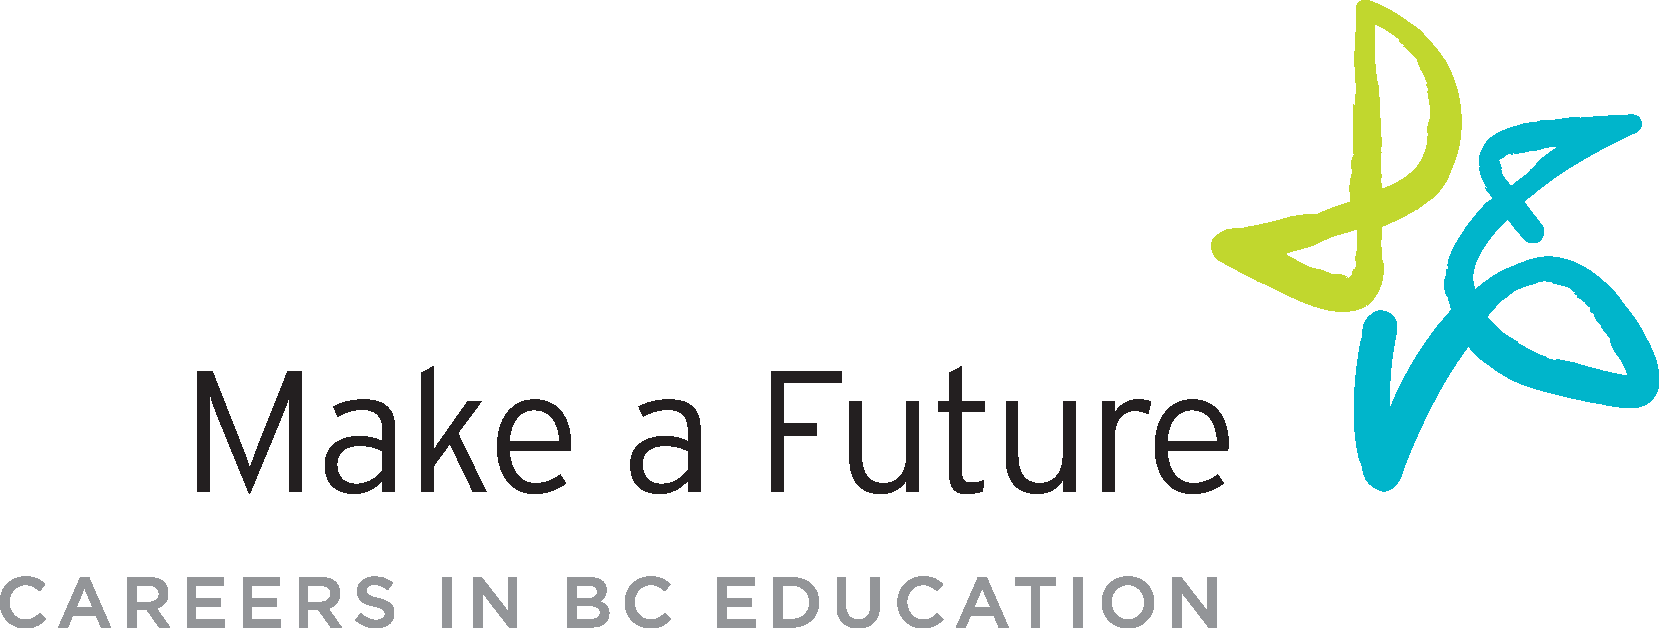 Make a Future - Careers in BC Education Logo